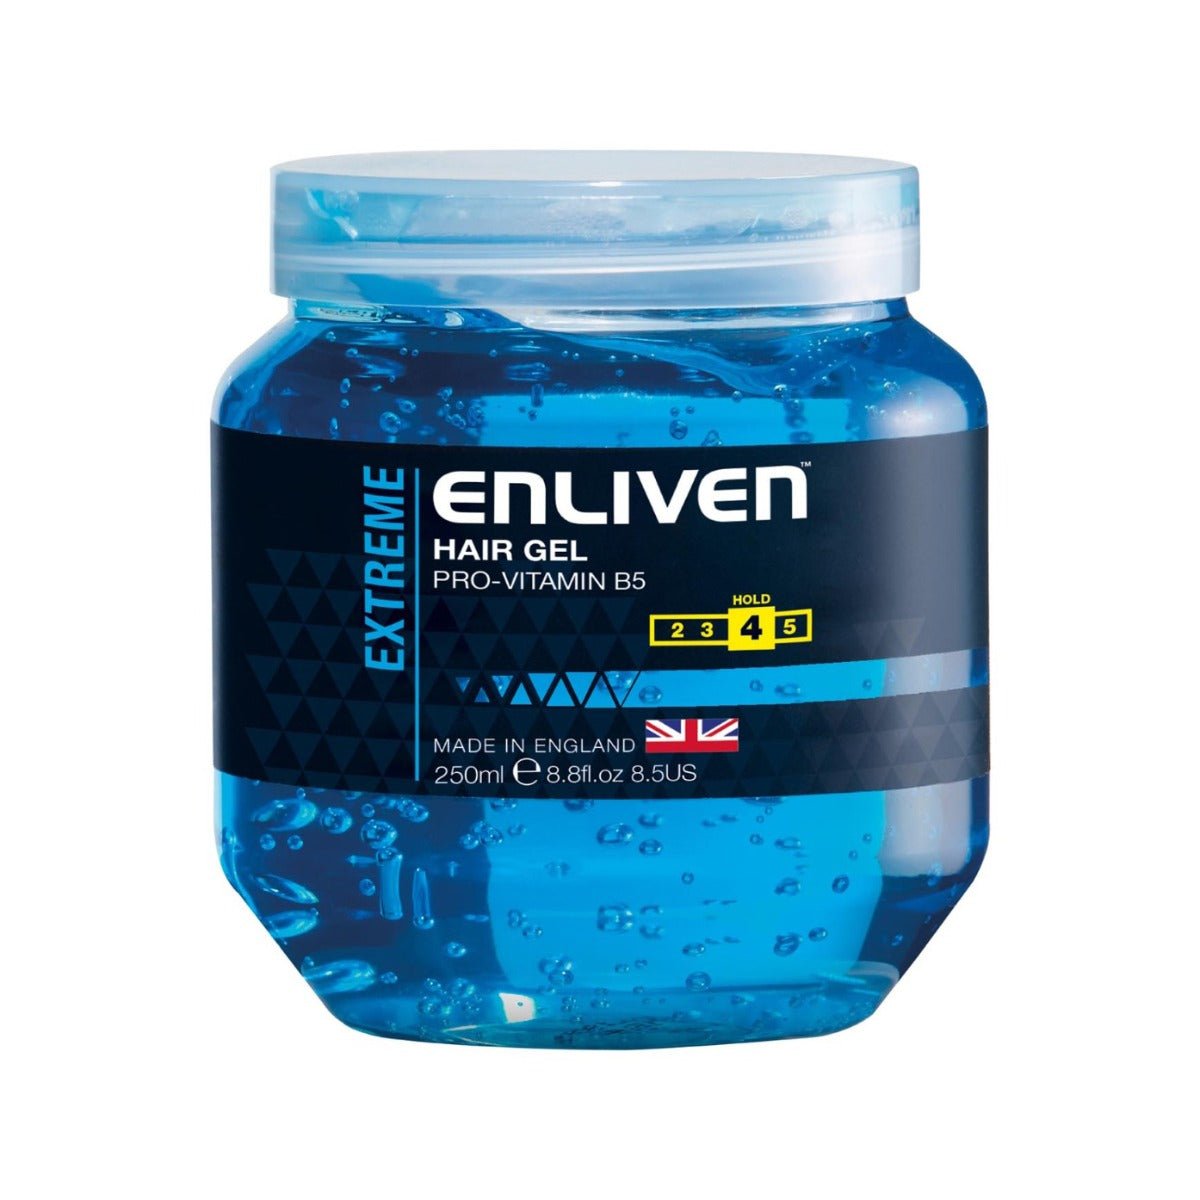 Enliven Hold 4 Extreme Hair Gel - Bloom Pharmacy